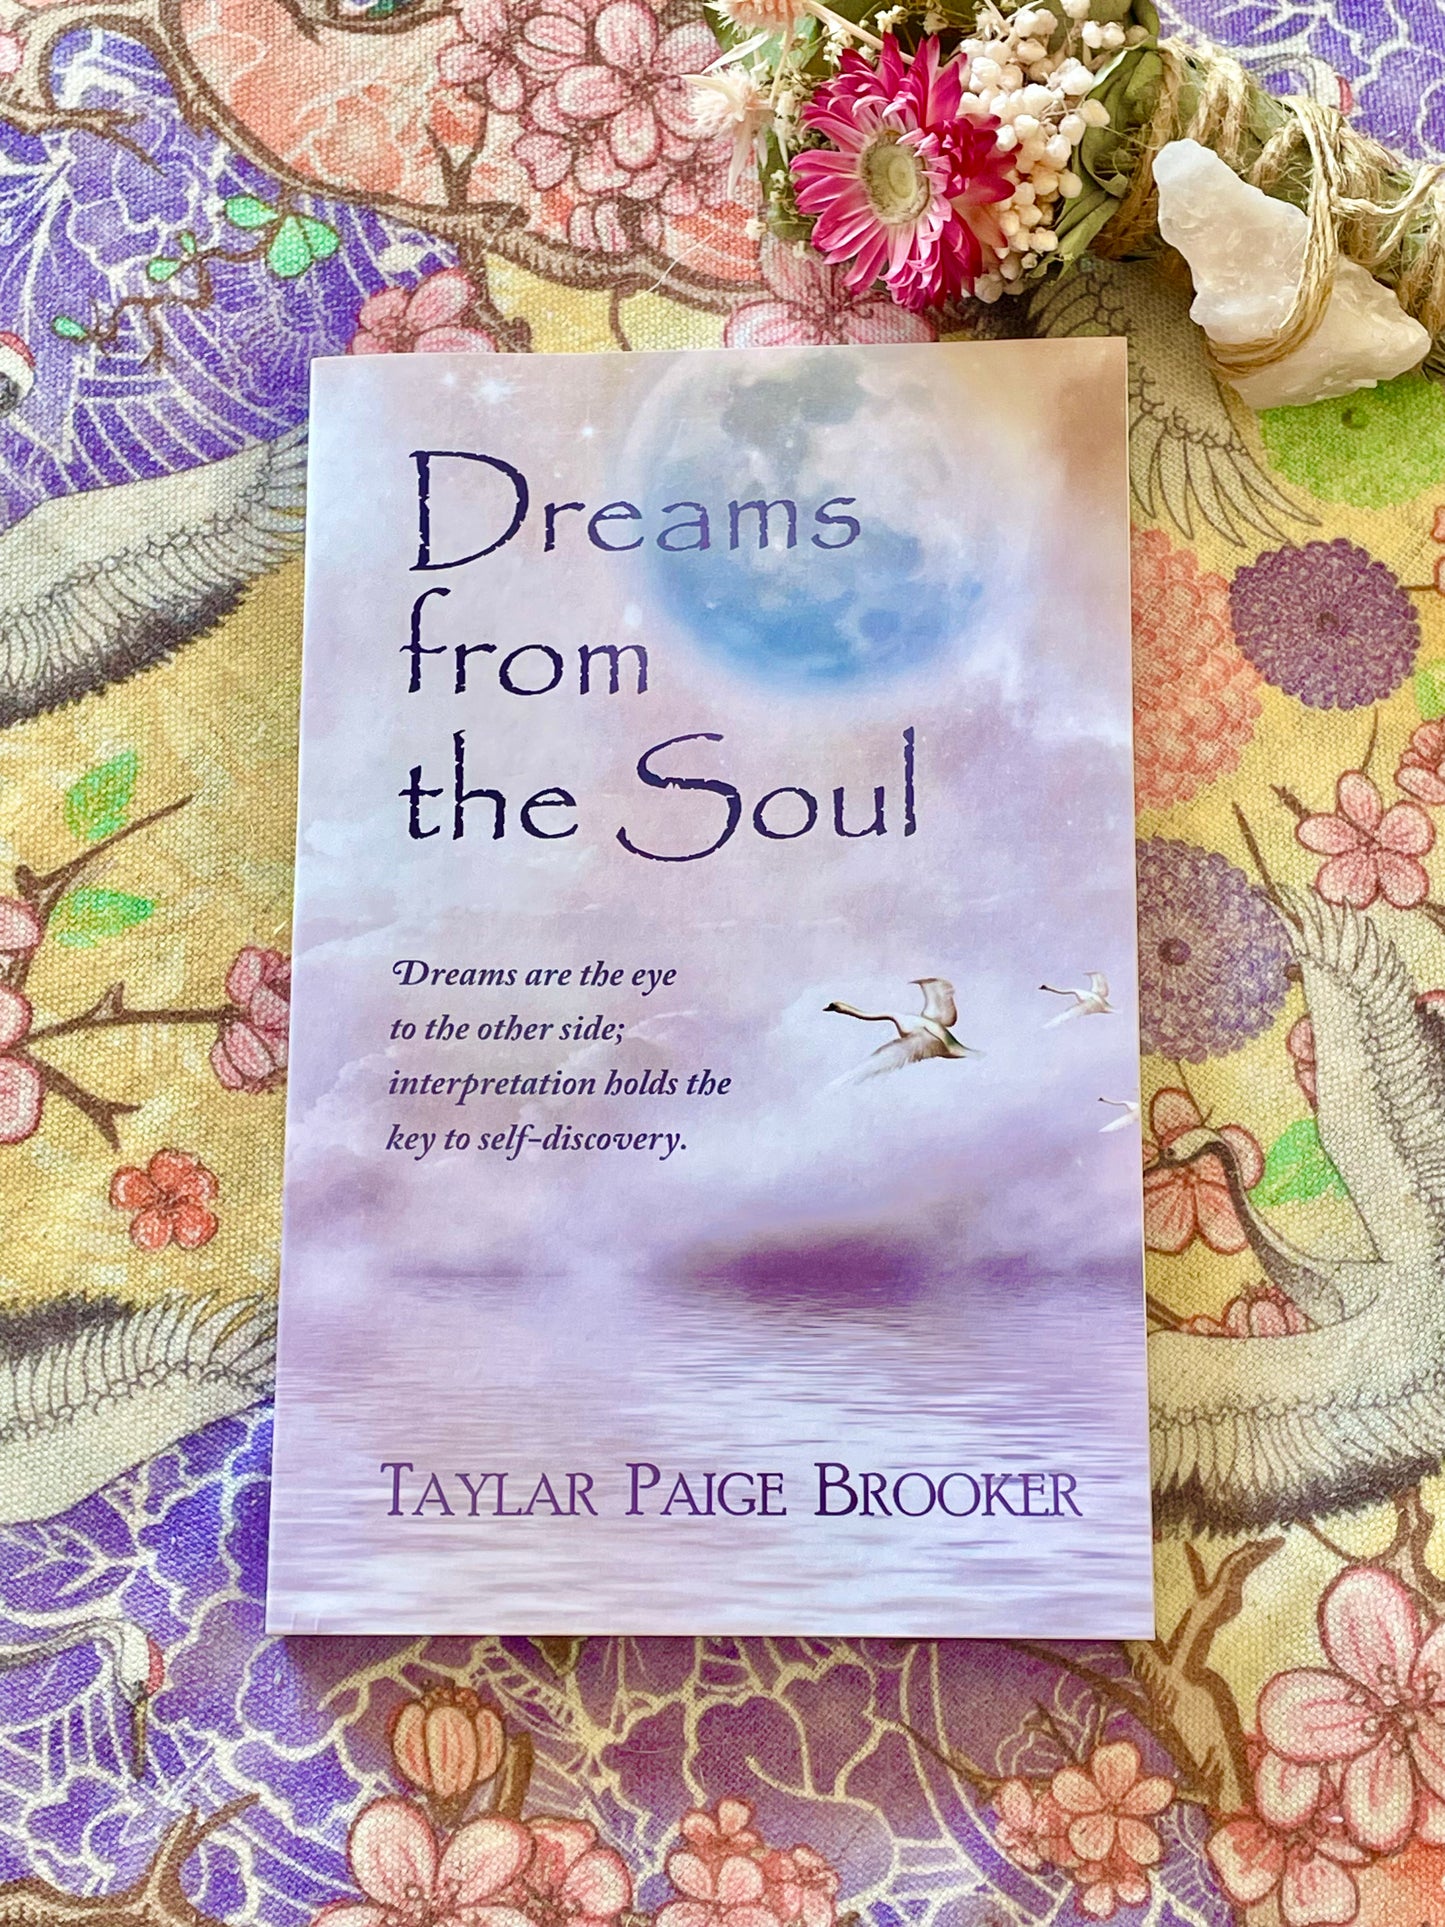 Dreams from the Soul ~ Taylar